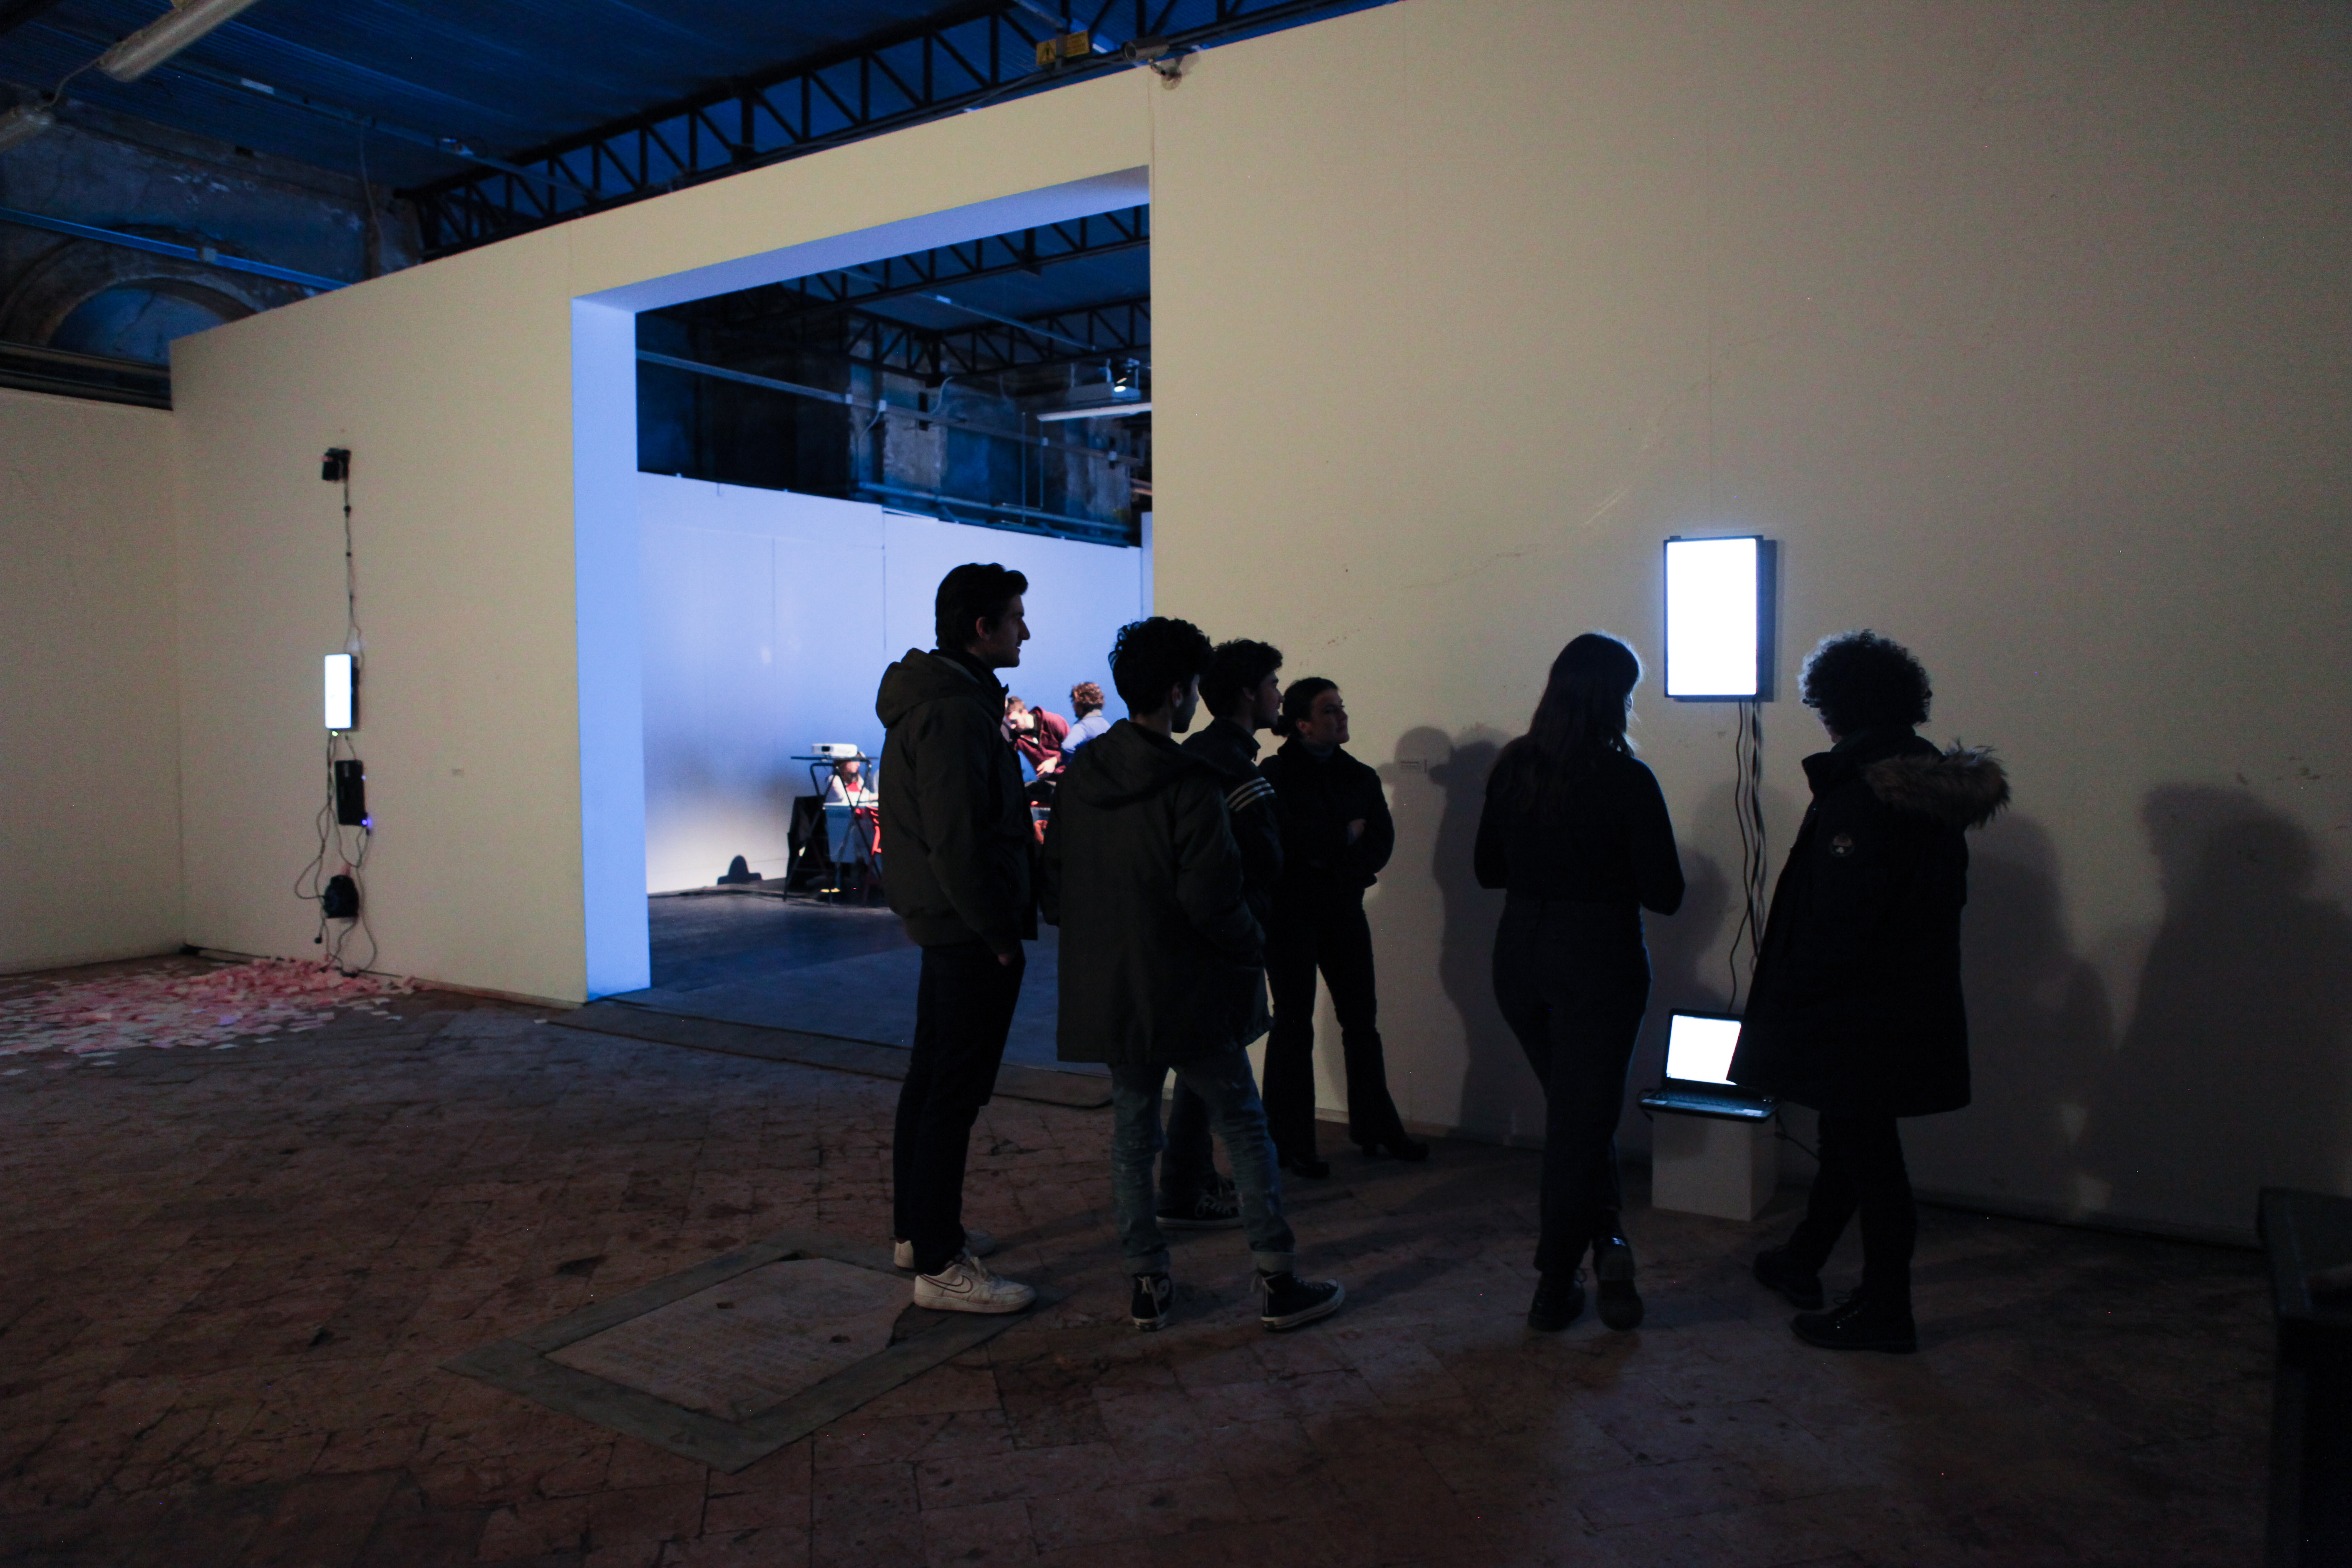 A group of students around a data visualizaton work during the opening